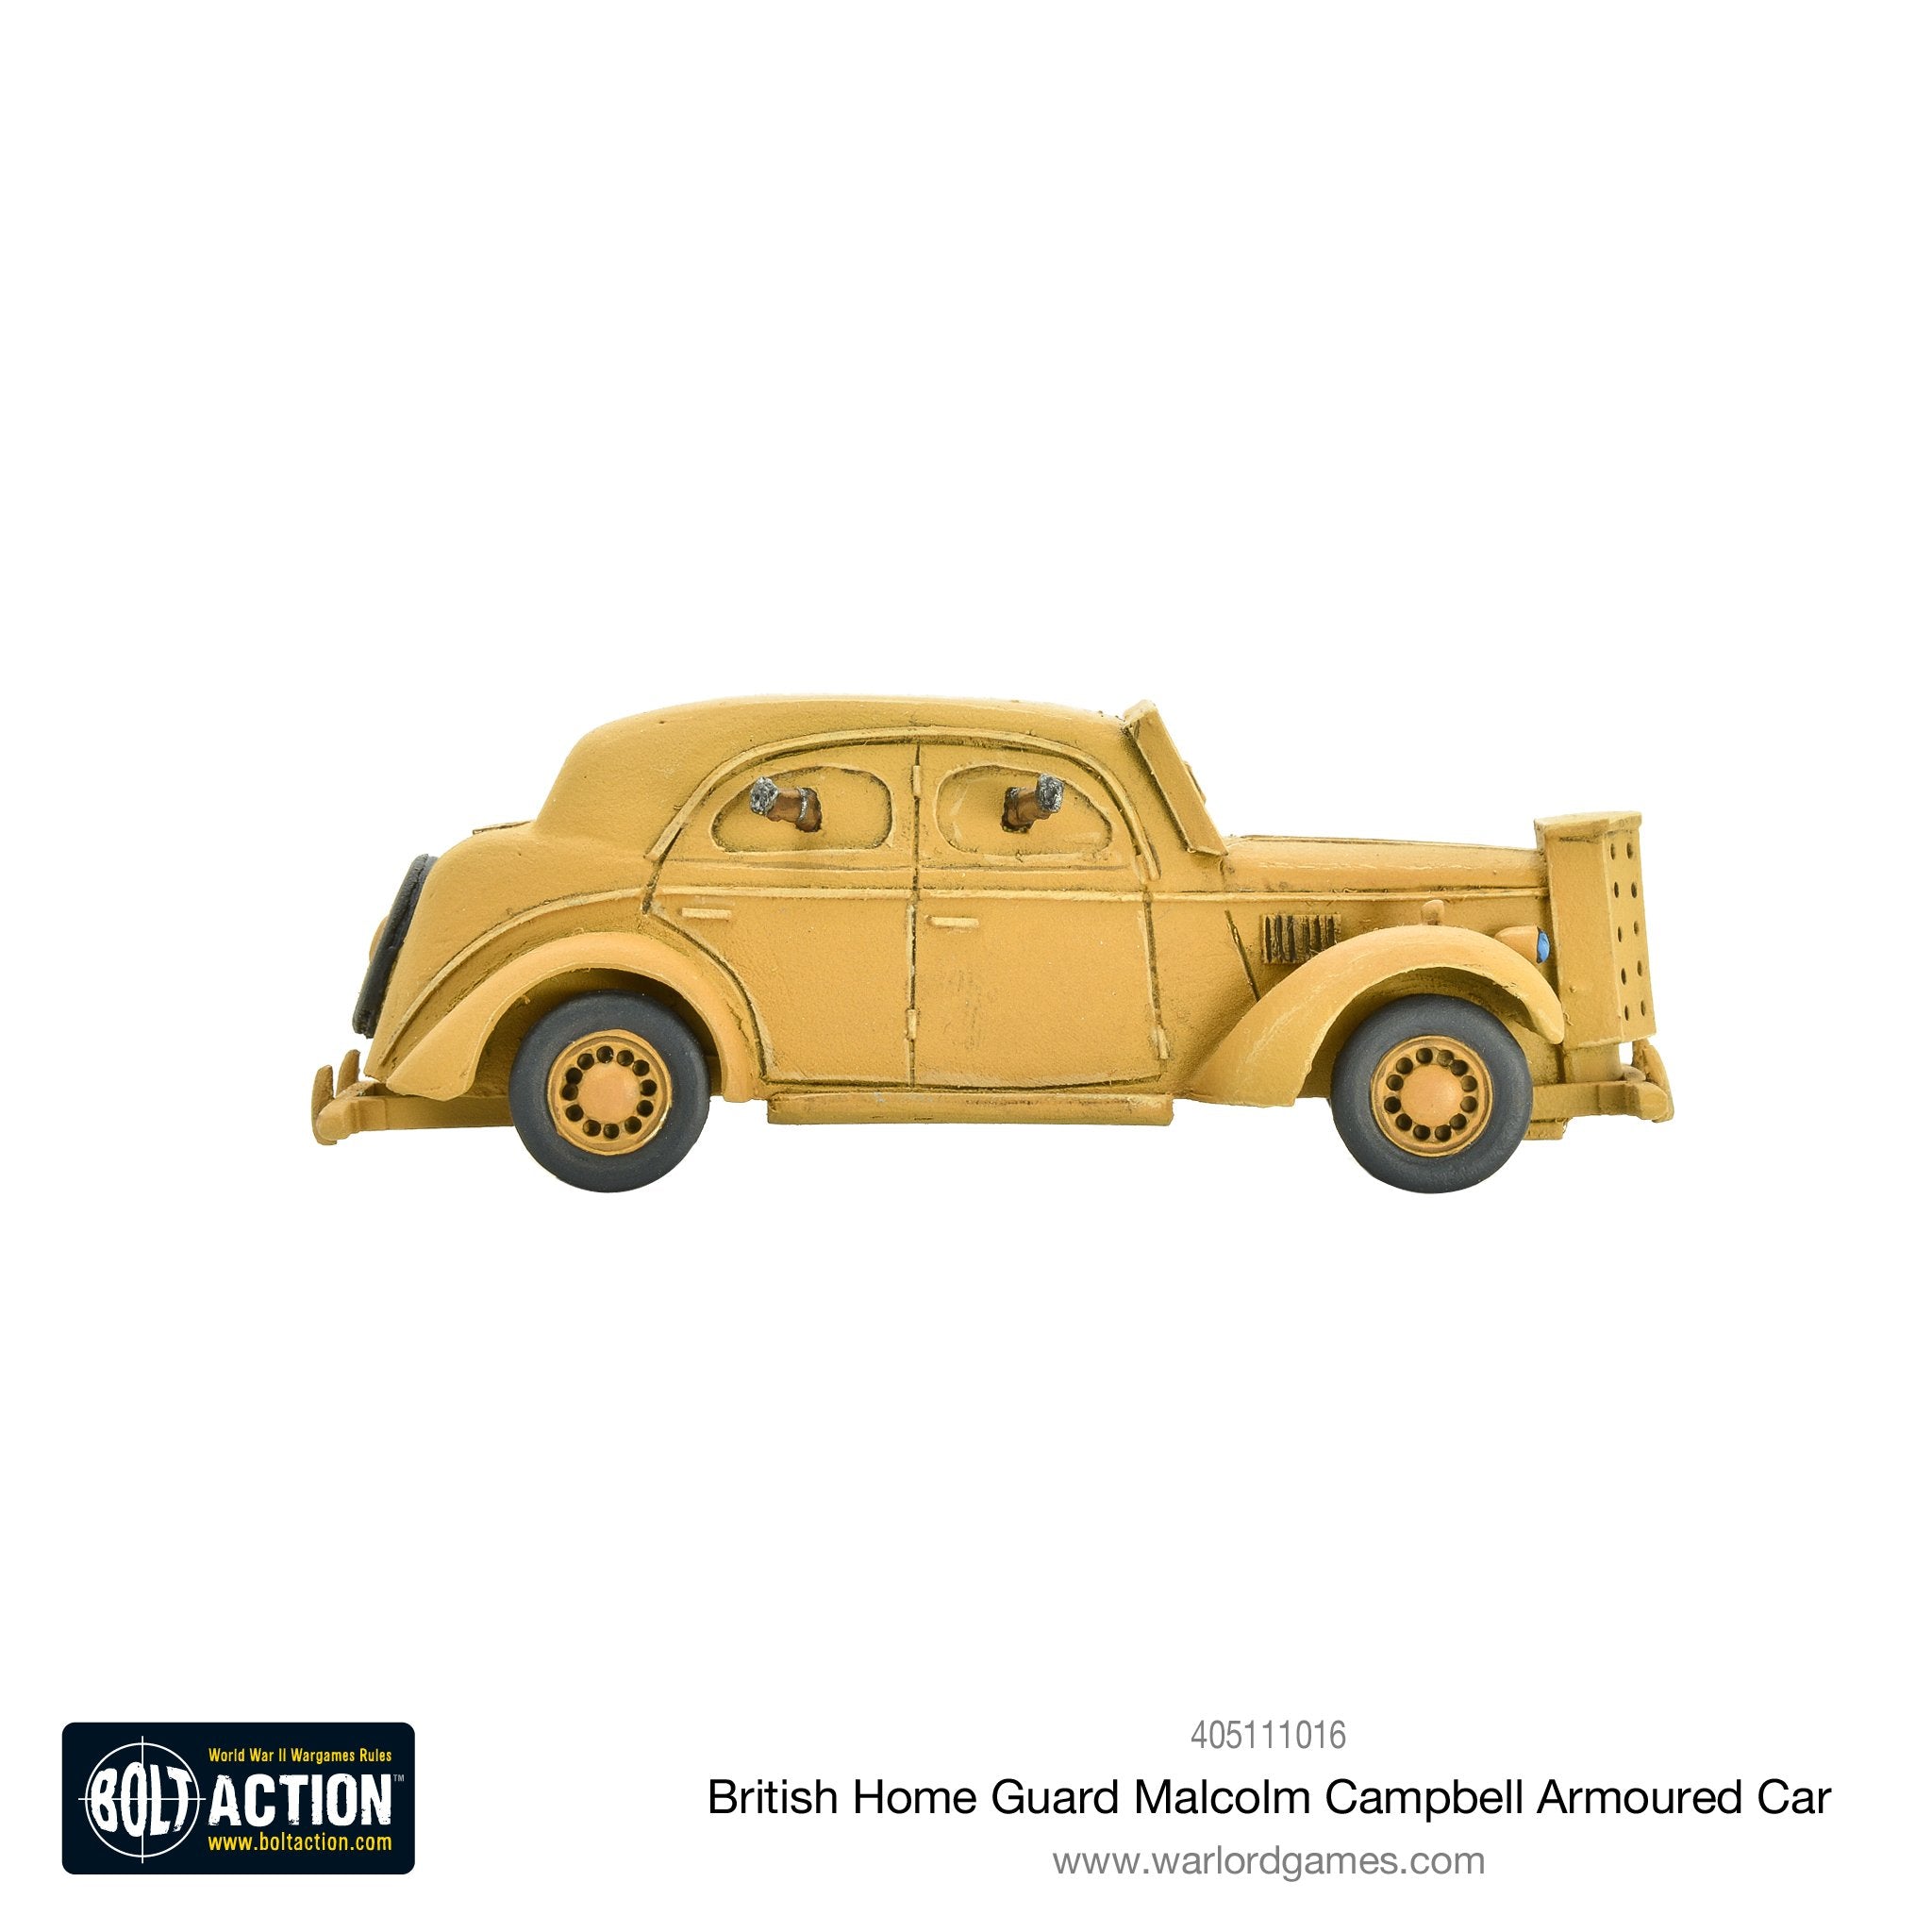 Home Guard 'Malcolm Campbell' armoured car